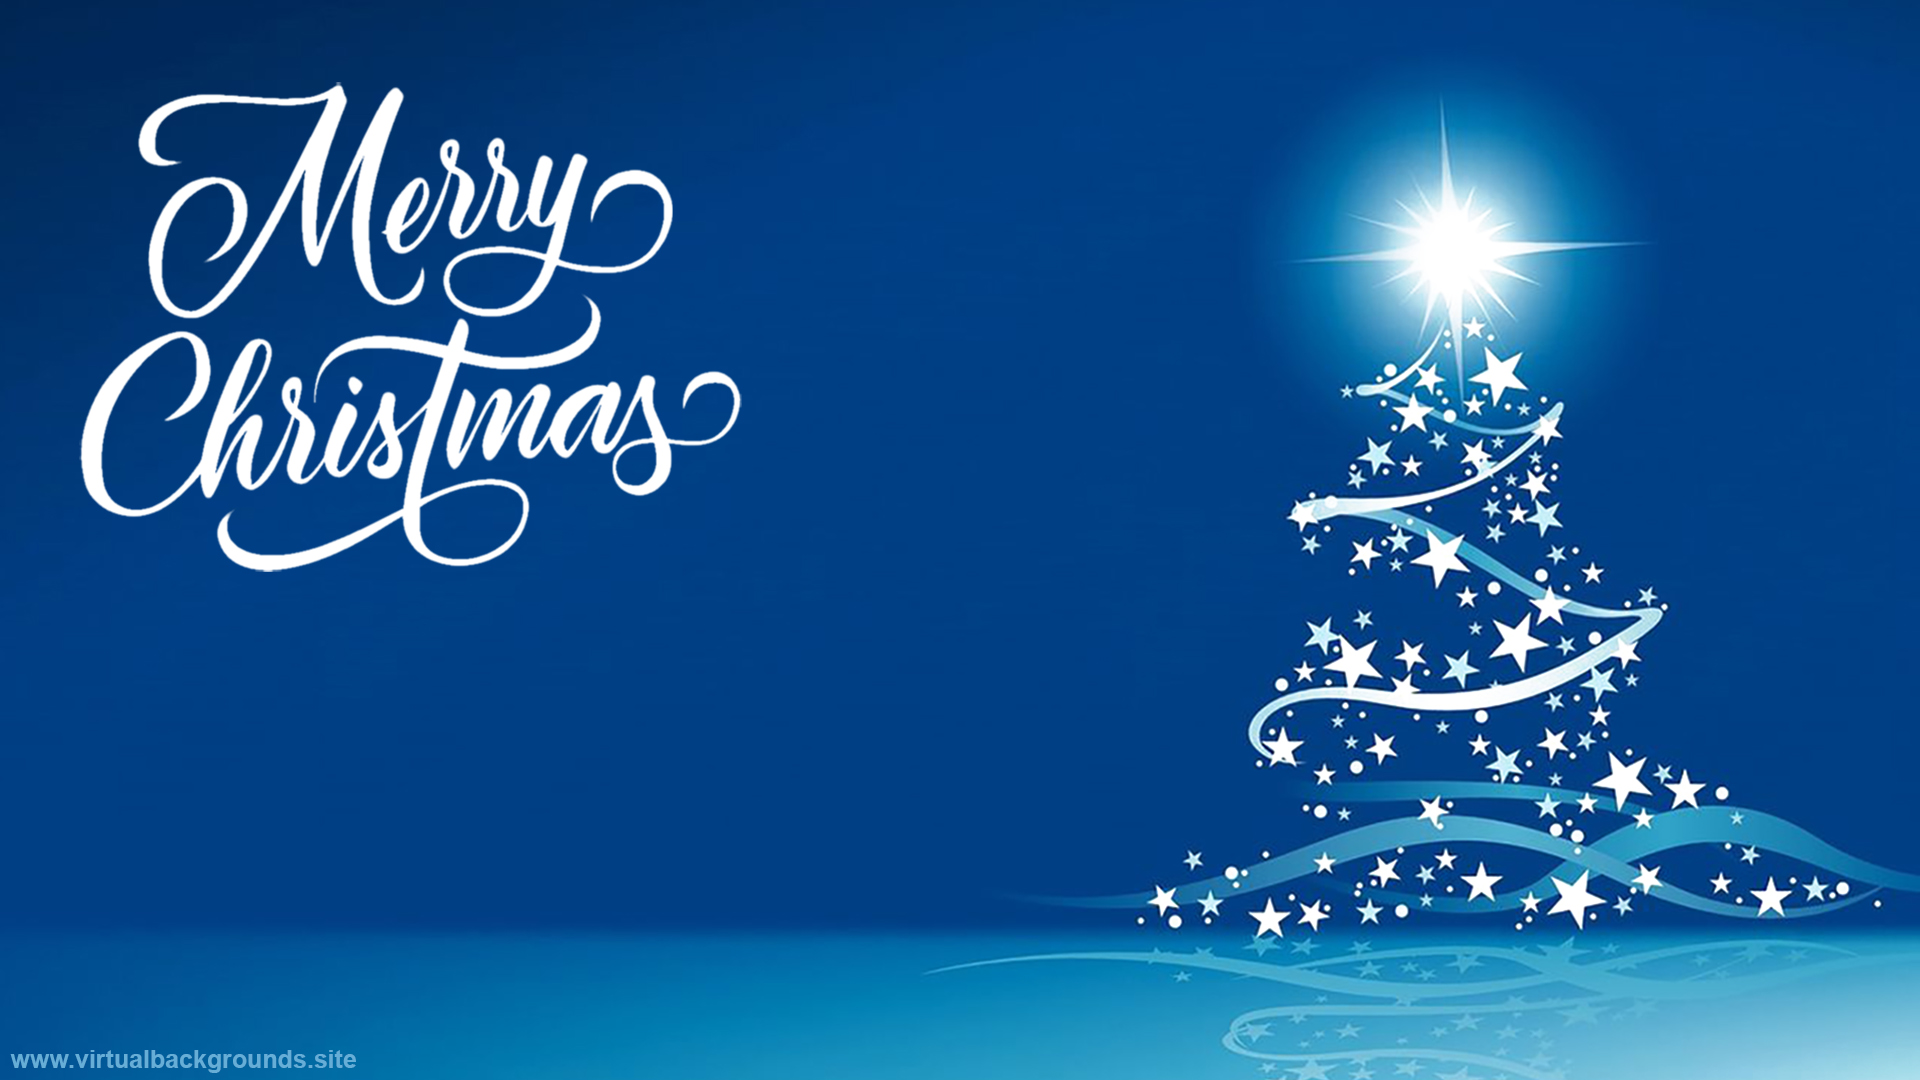 Merry Christmas in blue. Virtual background to use on Zoom, Microsoft Teams, Skype, Google Meet, WebEx or any other compatible app.